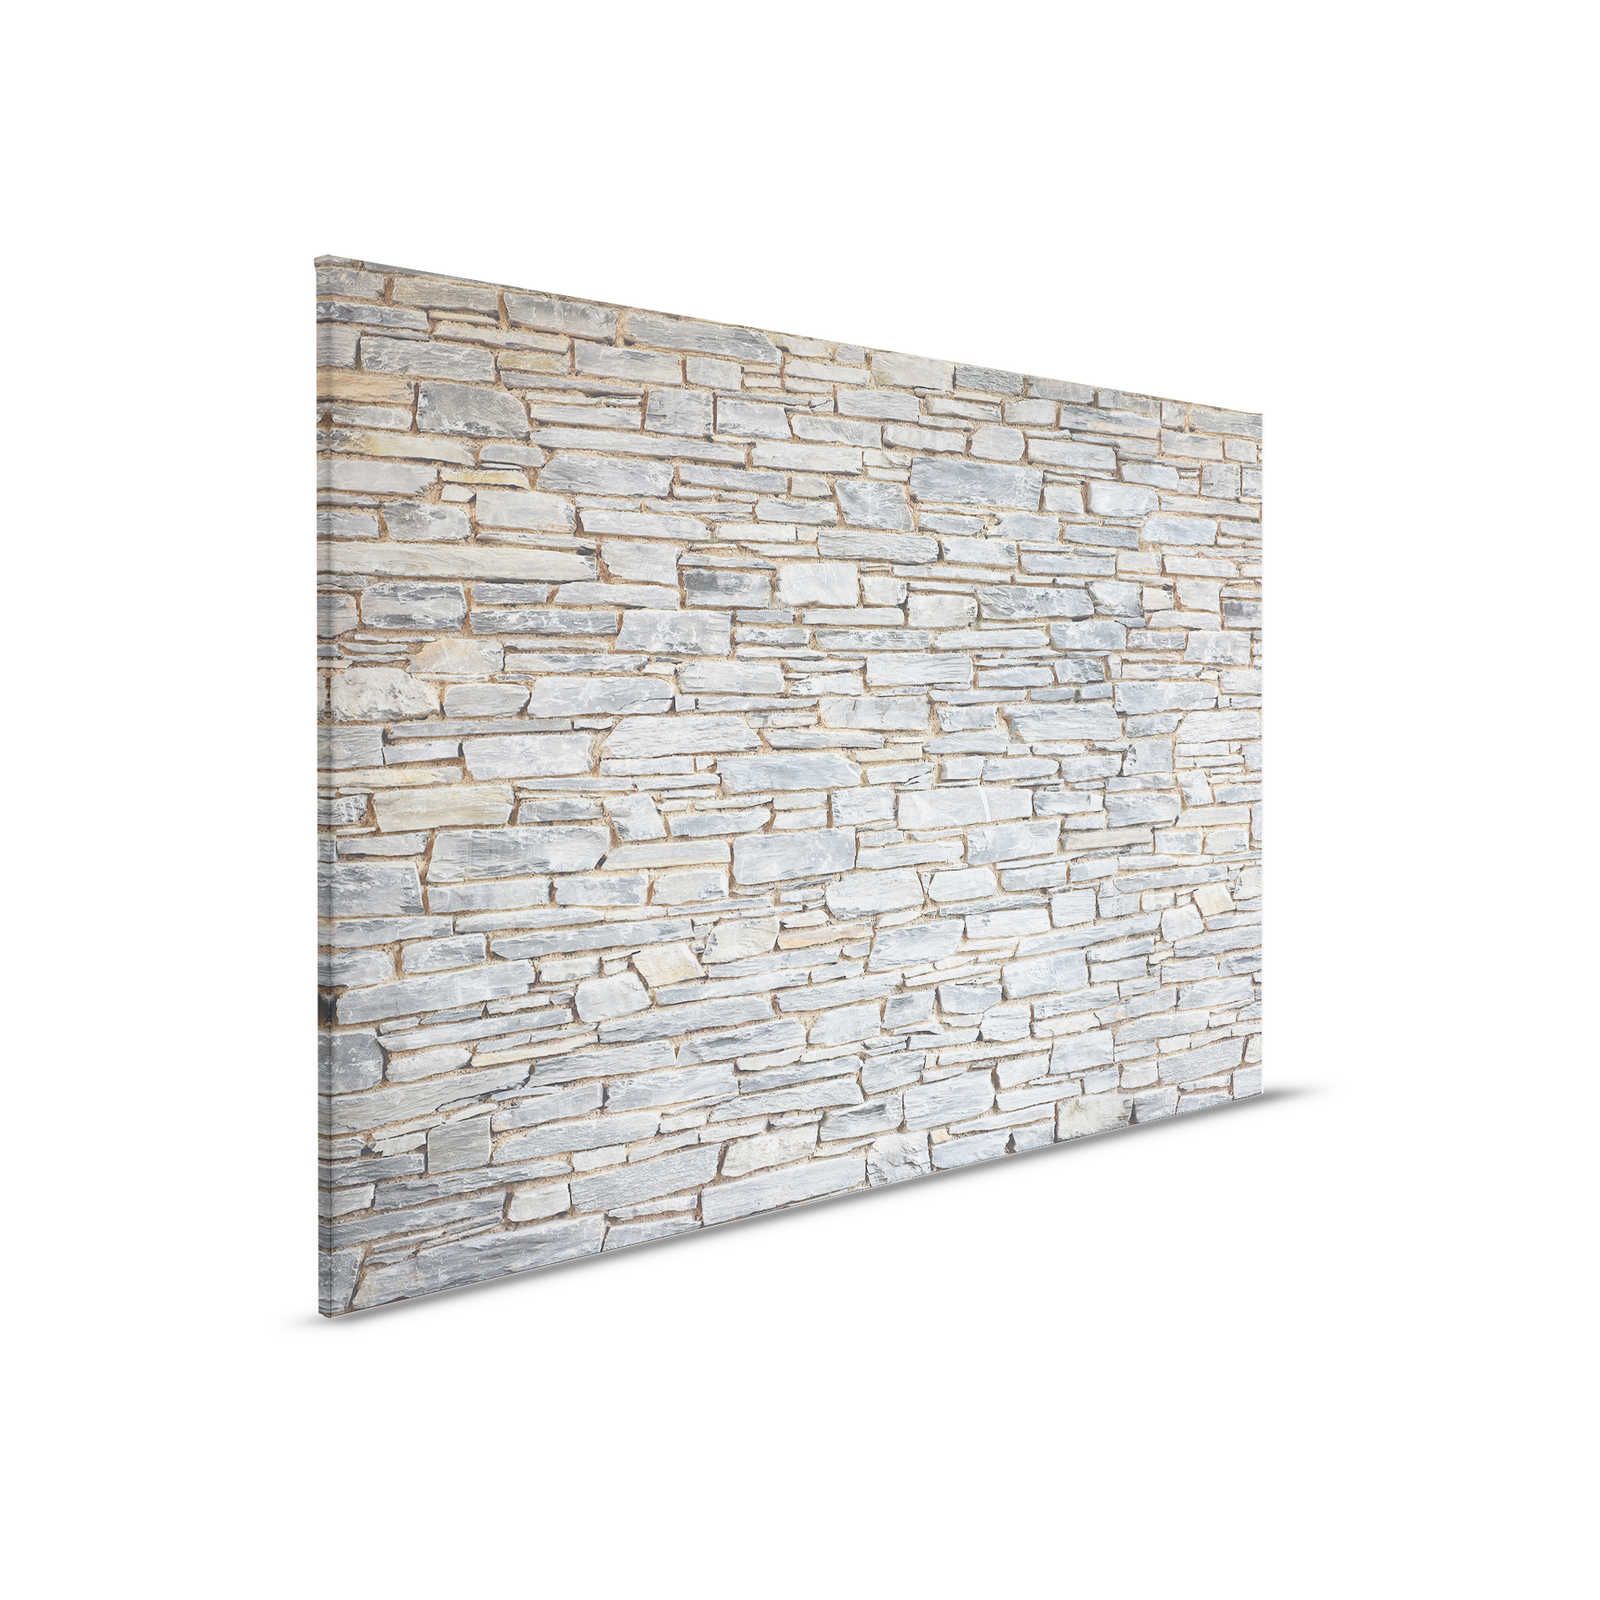         Stone Wall Canvas Painting Light Grey Nature Stone Look - 0.90 m x 0.60 m
    